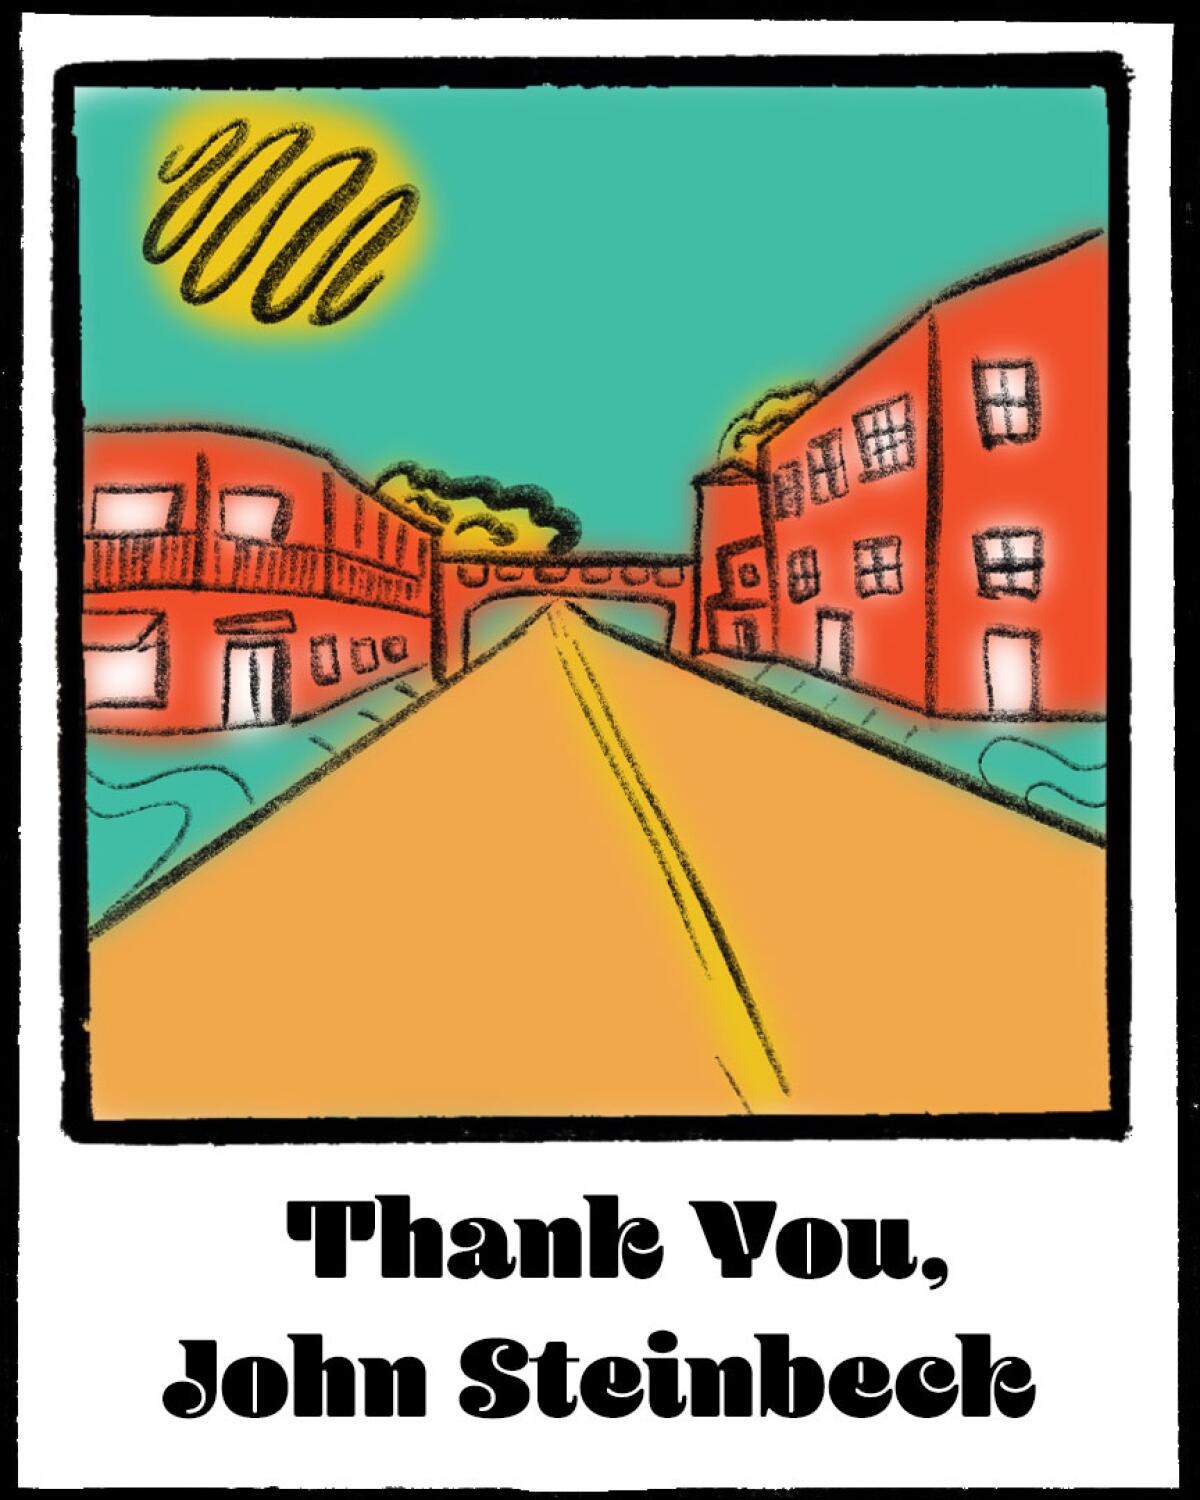 An illustration of a road with buildings on either side and the words "Thank you, John Steinbeck."